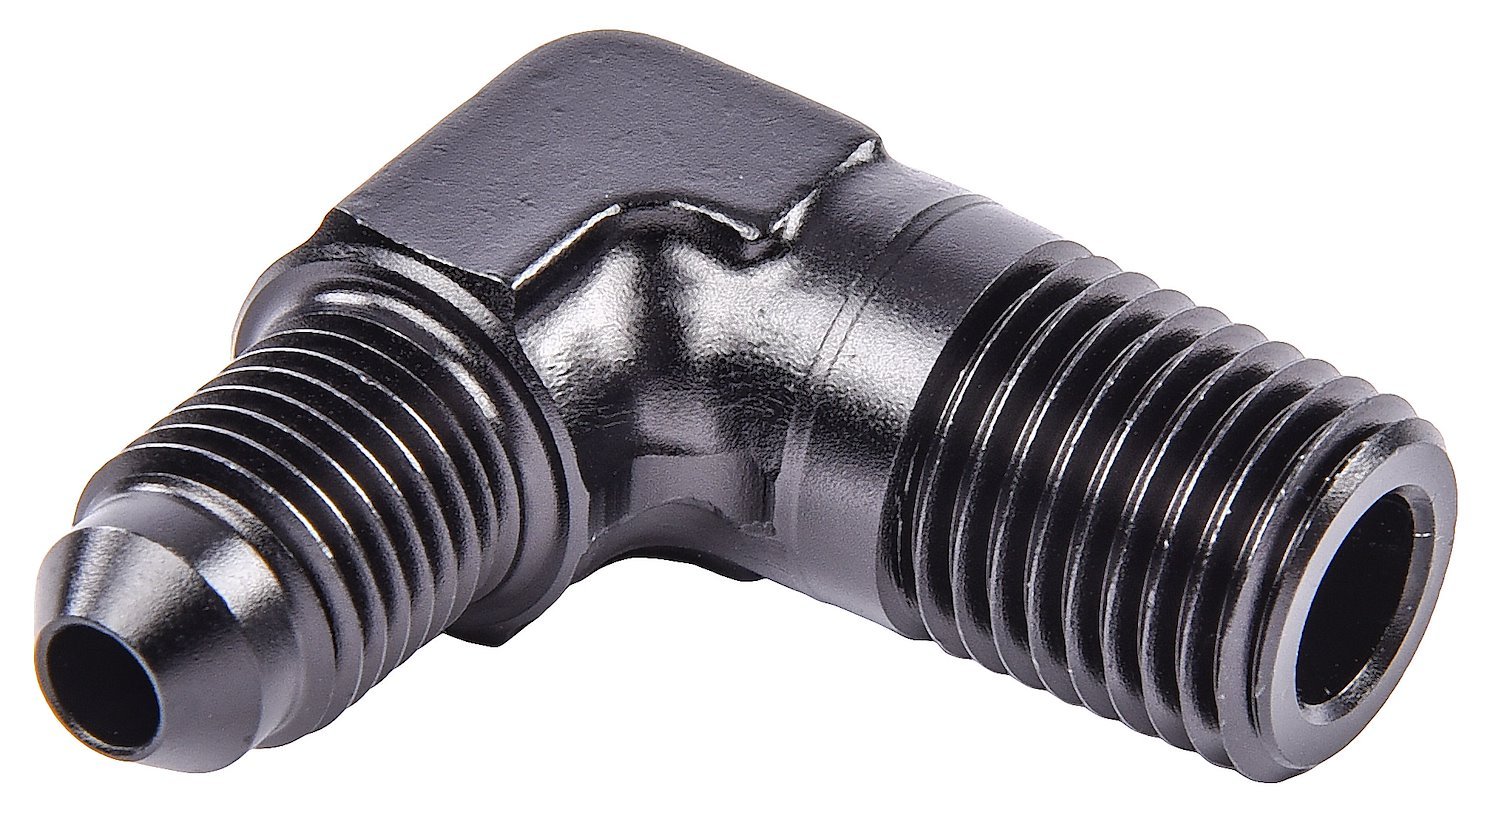 AN to NPT 90-Degree Adapter Fitting [-4 AN Male to 1/4 in. NPT Male, Black]